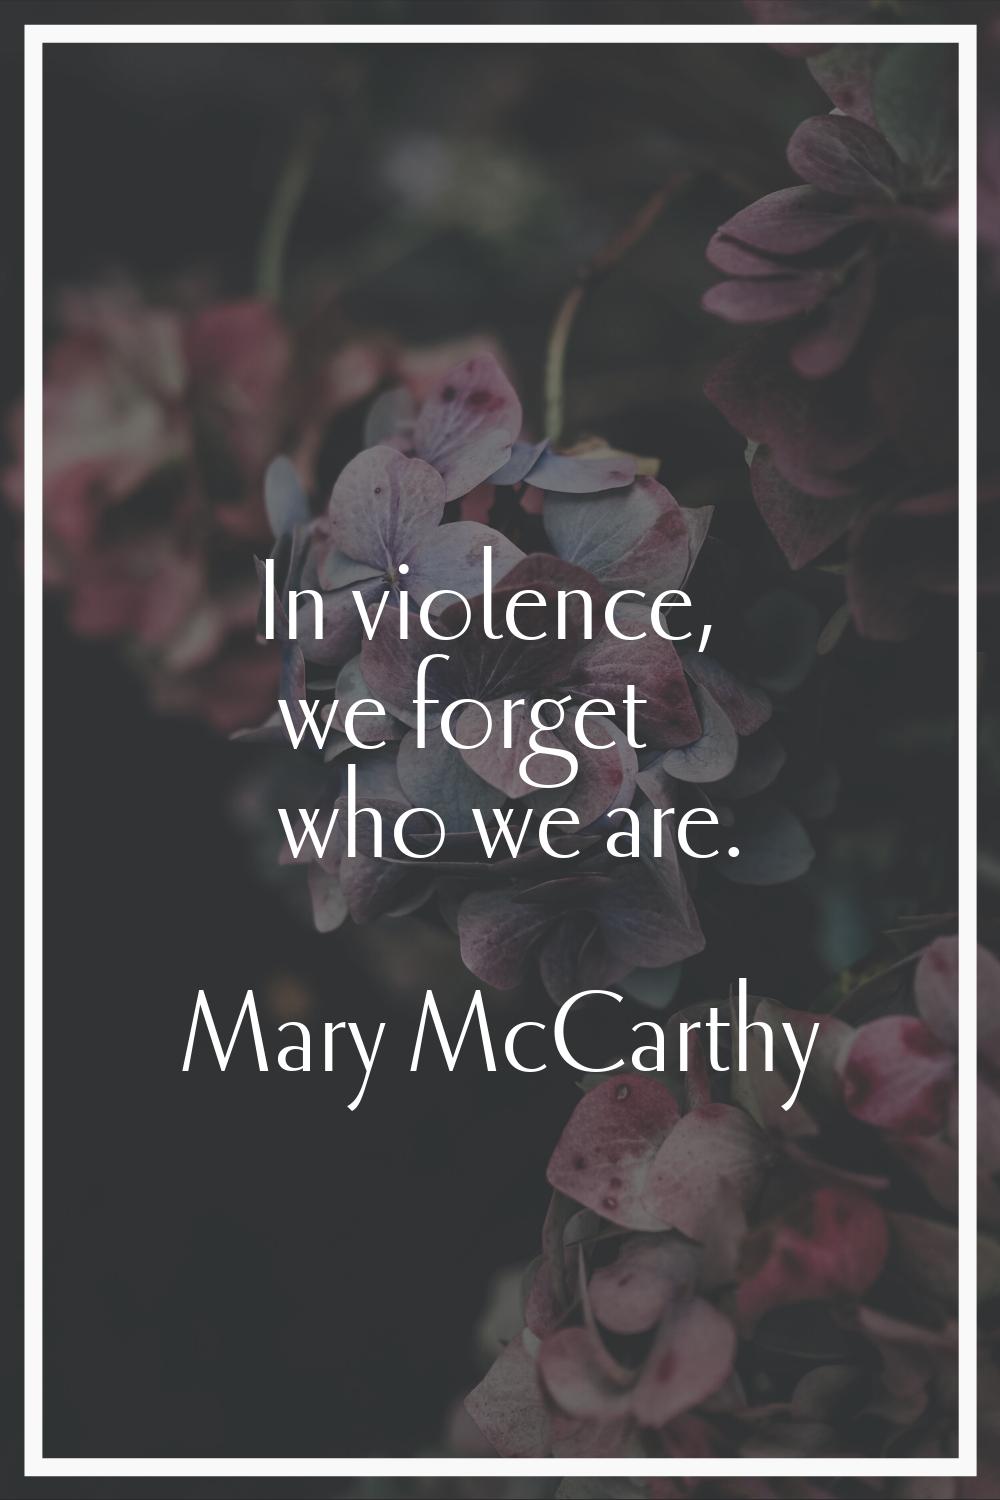 In violence, we forget who we are.